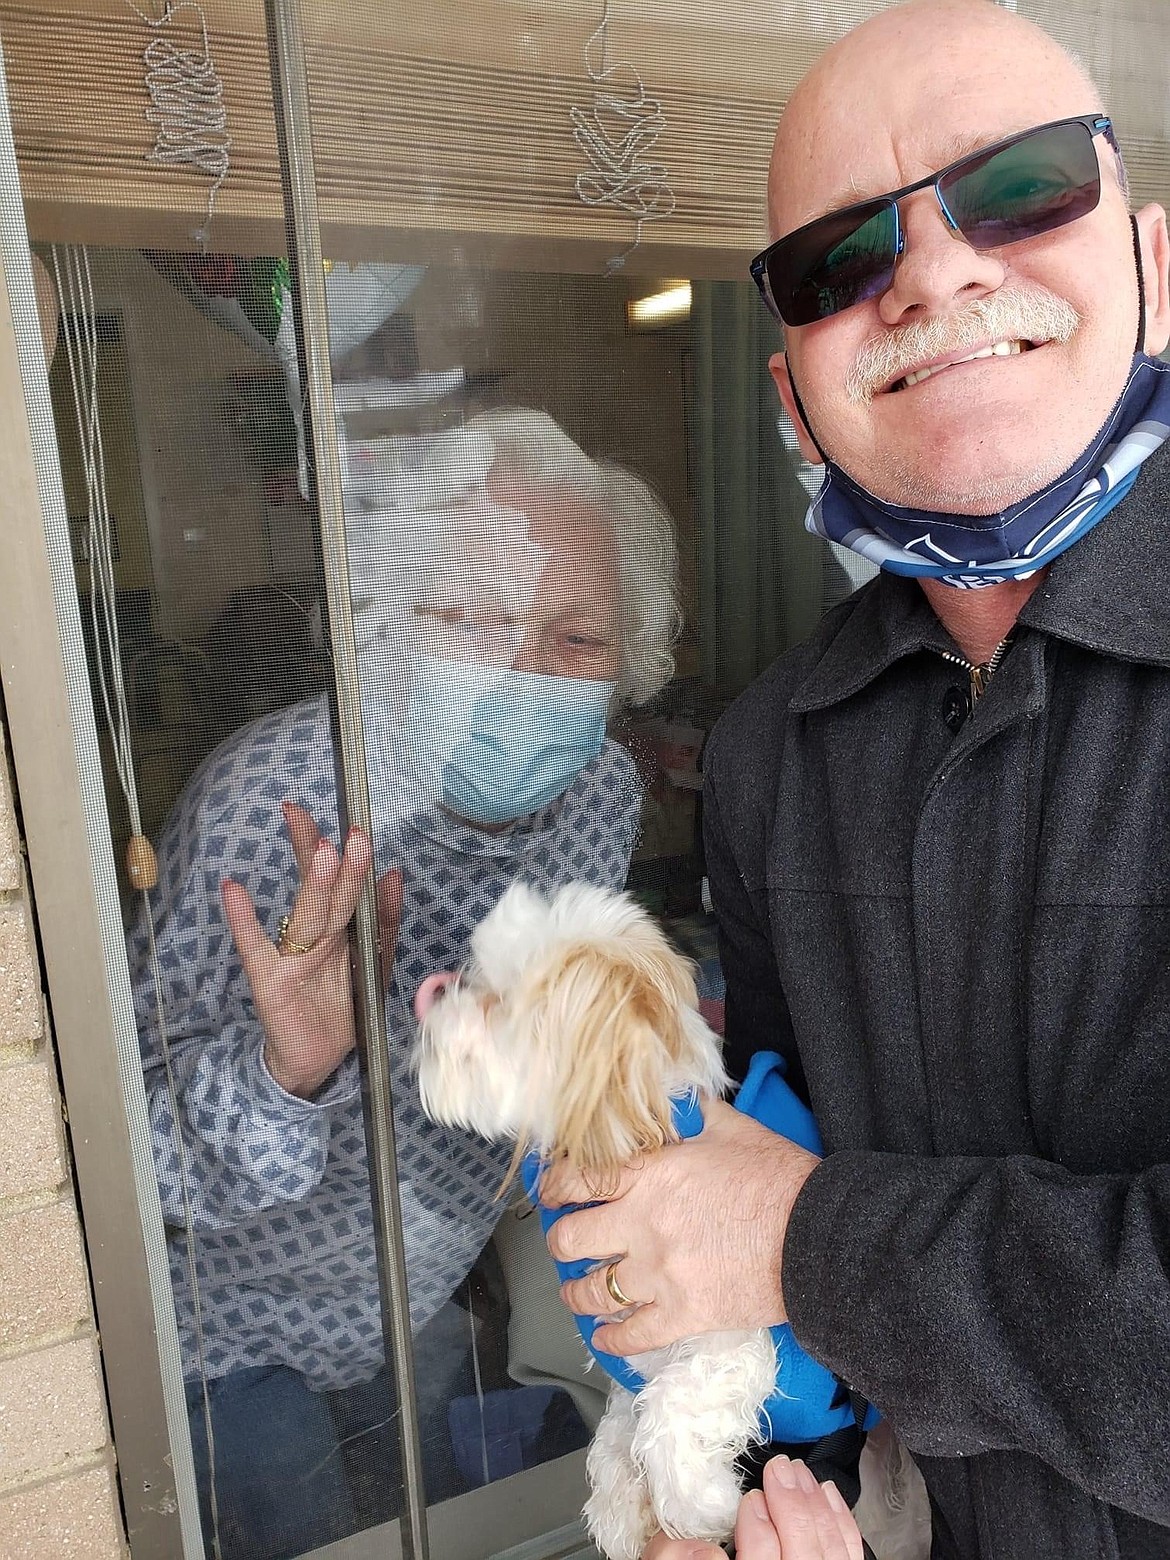 Steve Hanson of Coeur d'Alene and his dog, "Handsome Herbie Hanson," visit with his mom Dorla Johnson on Feb. 20 through the window at Mountain Valley of Cascadia in Kellogg.